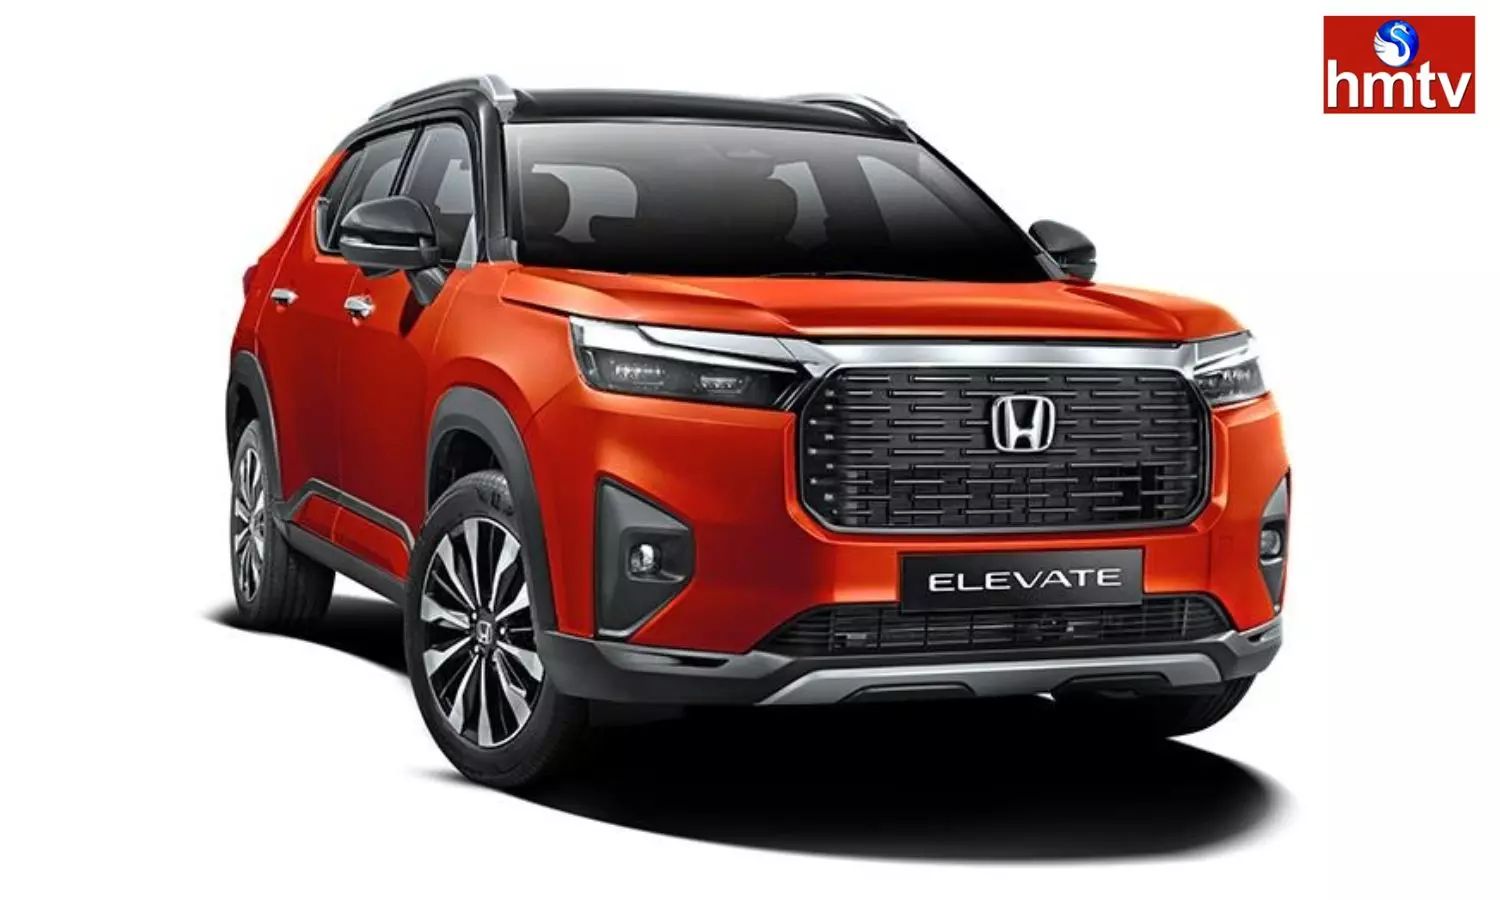 Honda Elevate New Price and Features Check Here